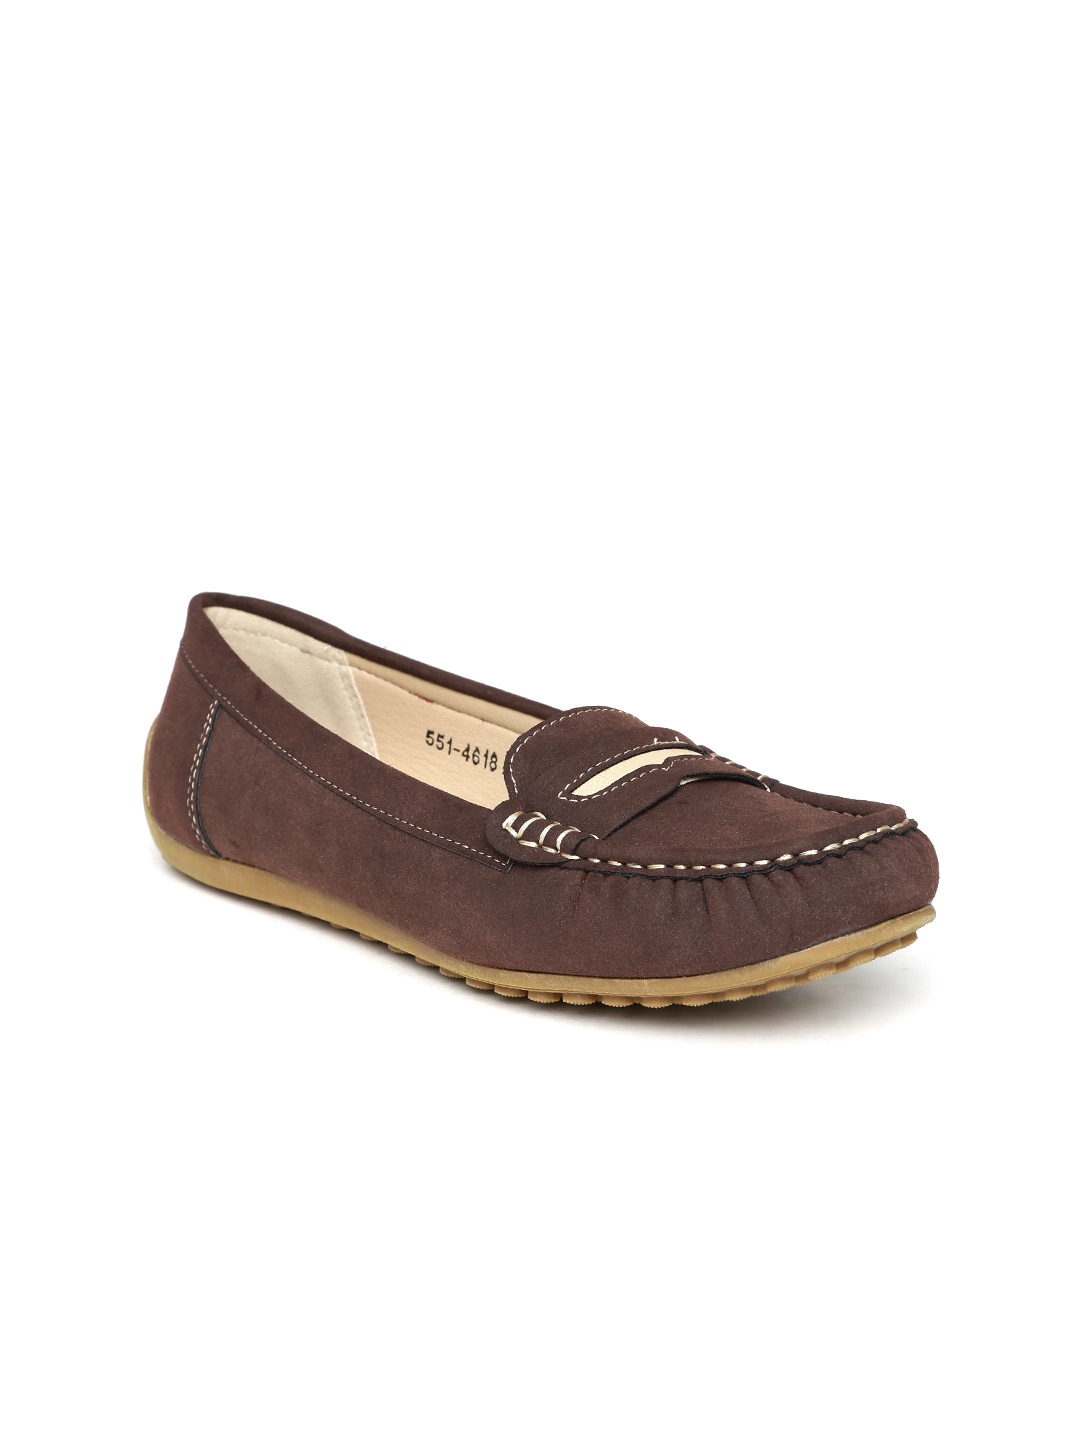 tan suede moccasins womens